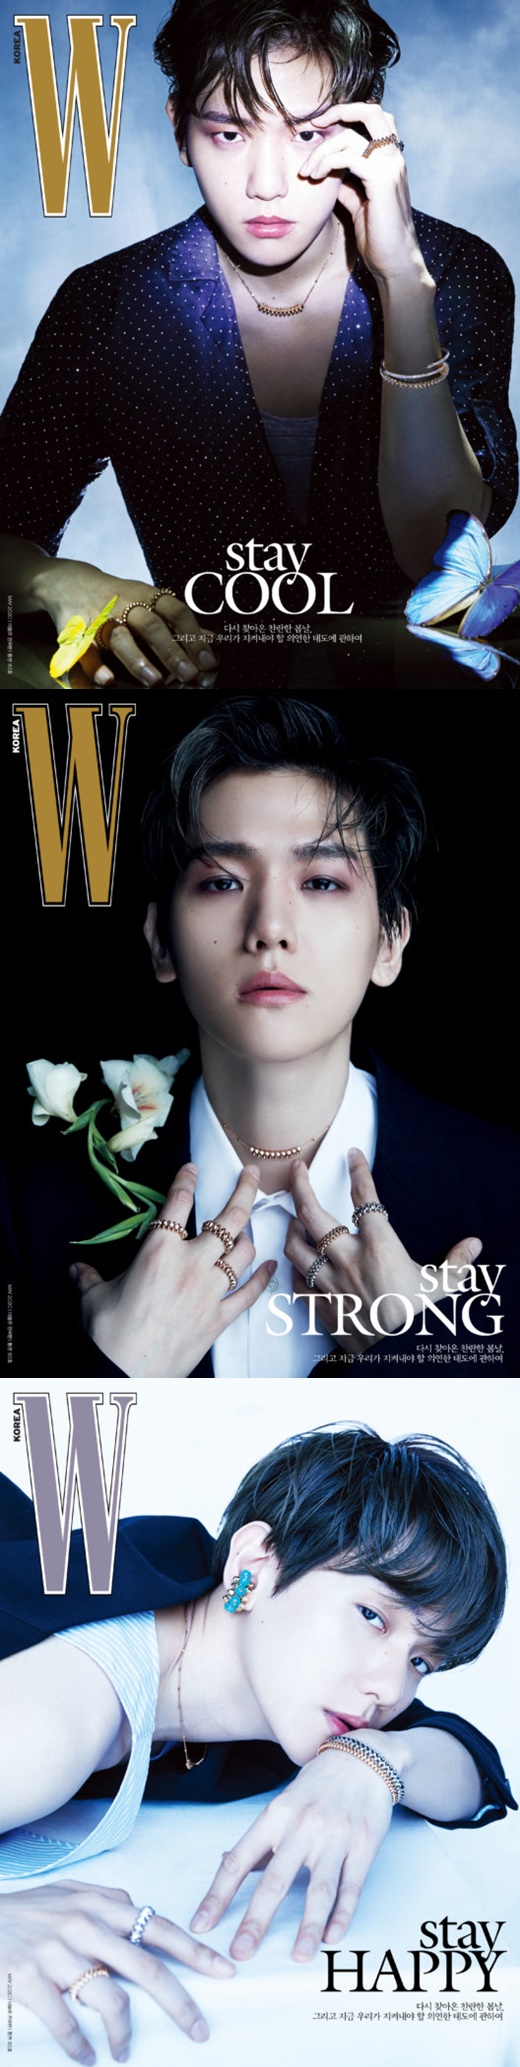 Group EXO member Baekhyun has unrivaled charm.This wisdom very editor of fashion magazine W. Korea released a cover photo of the May issue on his instagram on the 13th.The main character is Baekhyun. Baekhyun, who became a cover model, overwhelmed those who saw it as a dreamy atmosphere.In addition, this wisdom very editor said, Stay Cool, Stay Happy, Stay Strong!This month, W. is still in the voice of hoping for a brilliant landscape that will finally come, and sheds light on the unchanging attitude we should keep.In the spring of 2020, which will be remembered by anyone, EXO Baekhyun invites us to a soft and hard world like a seasonal breeze. 